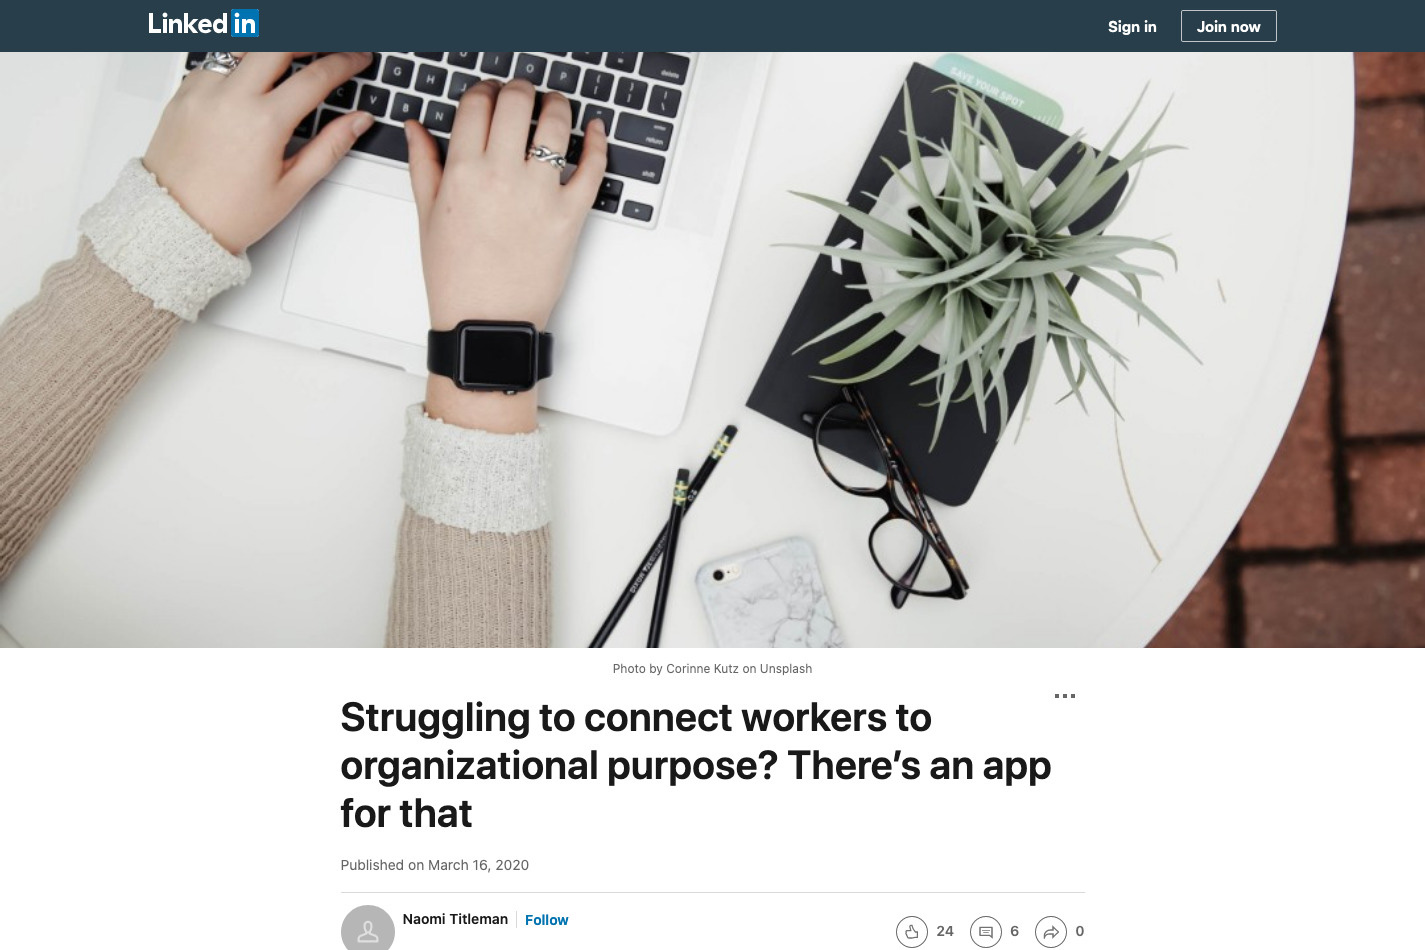 Struggling to connect workers to organizational purpose? There’s an app for that